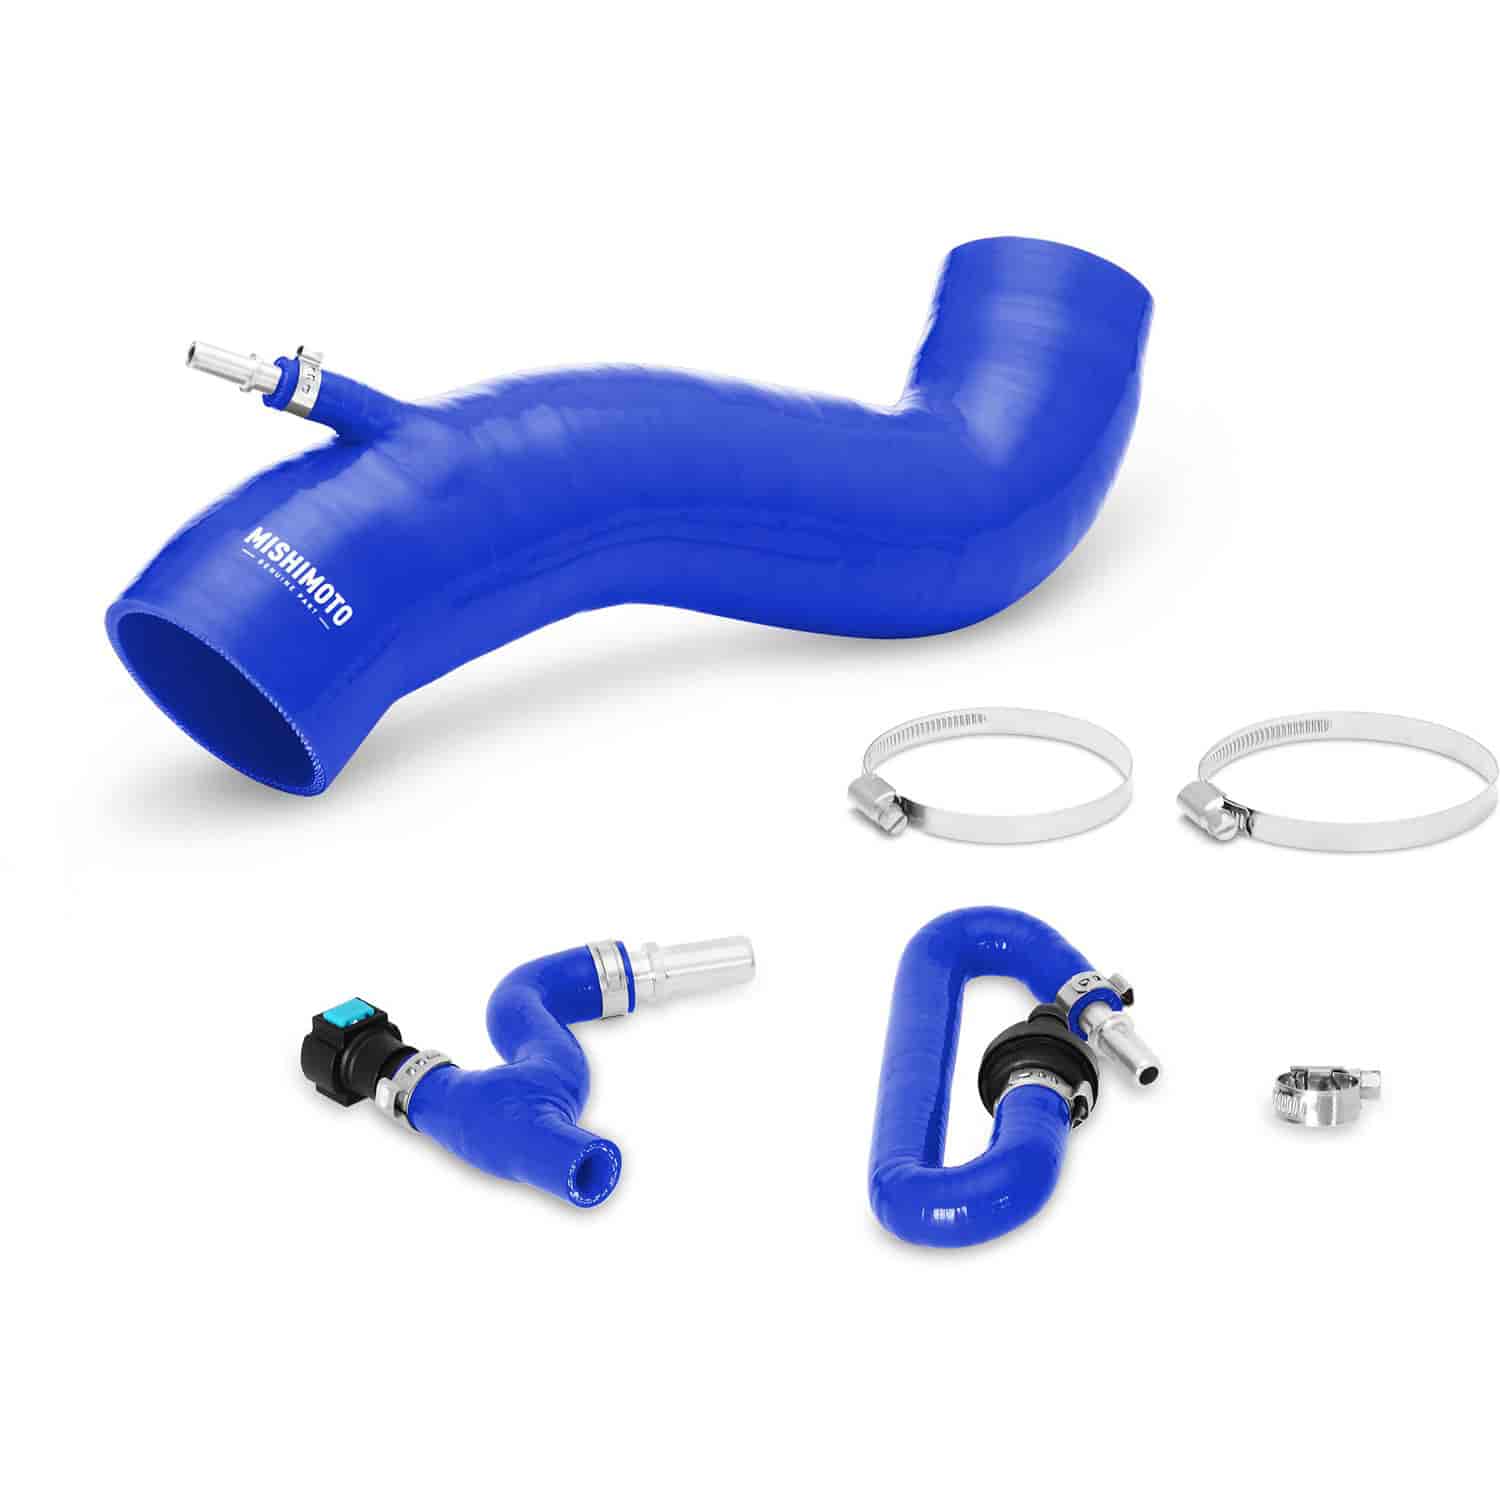 Ford Fiesta ST Silicone Induction Hose - MFG Part No. MMHOSE-FIST-16IHBL